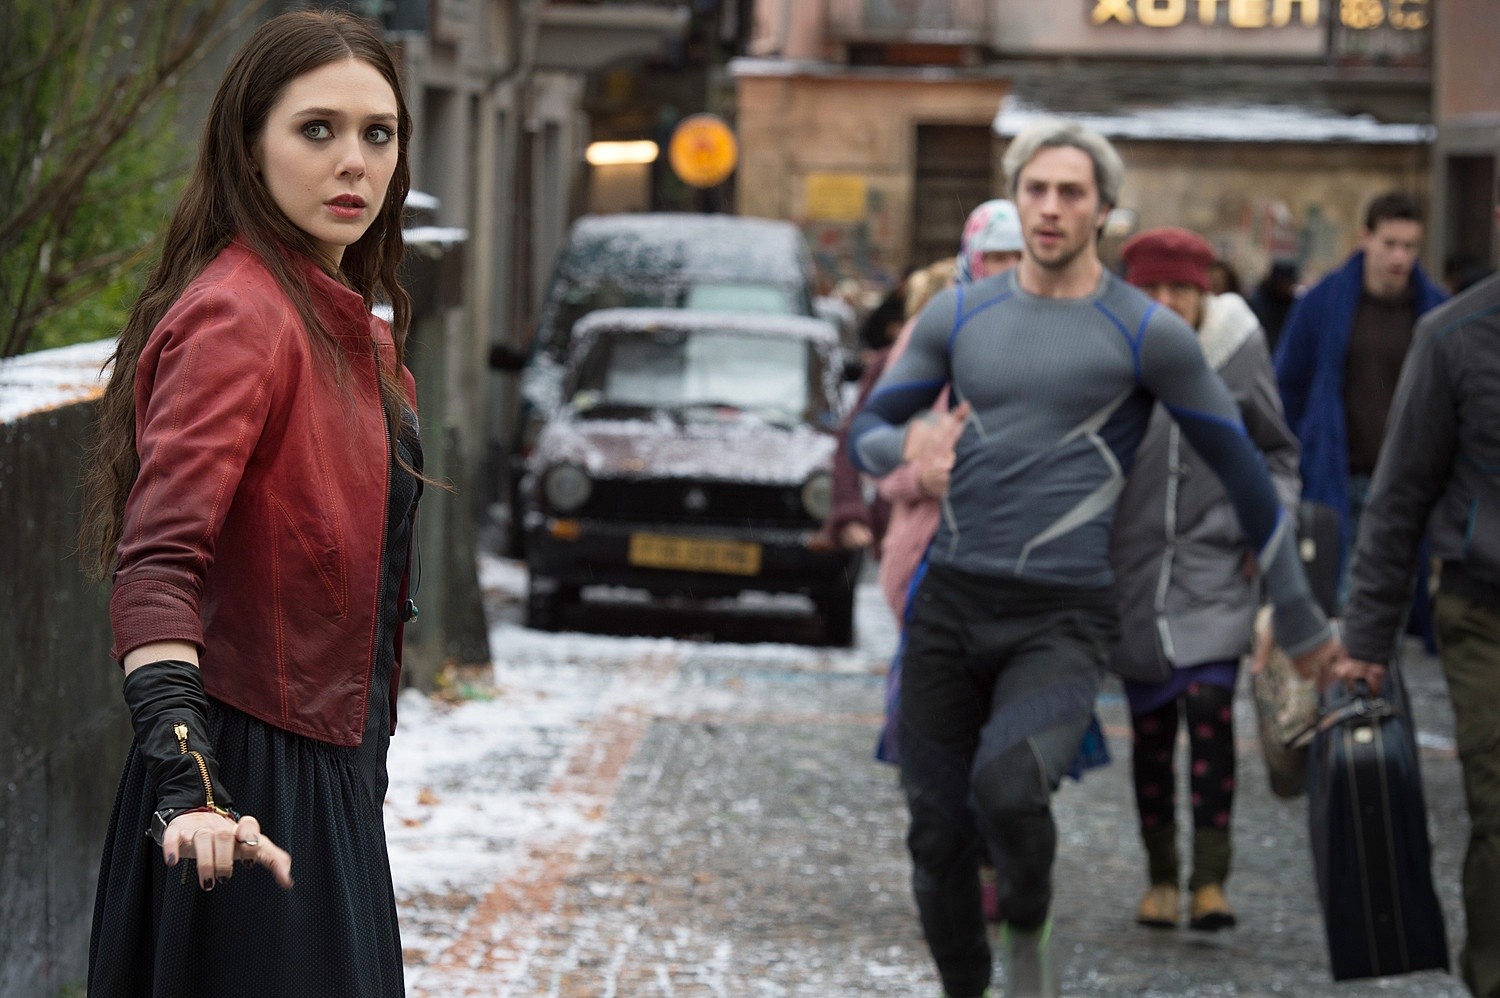 Elizabeth Olsen stars as Wanda Maximoff/Scarlet Witch and Aaron Johnson stars as Pietro Maximoff/Quicksilver in Walt Disney Pictures' Avengers: Age of Ultron (2015)